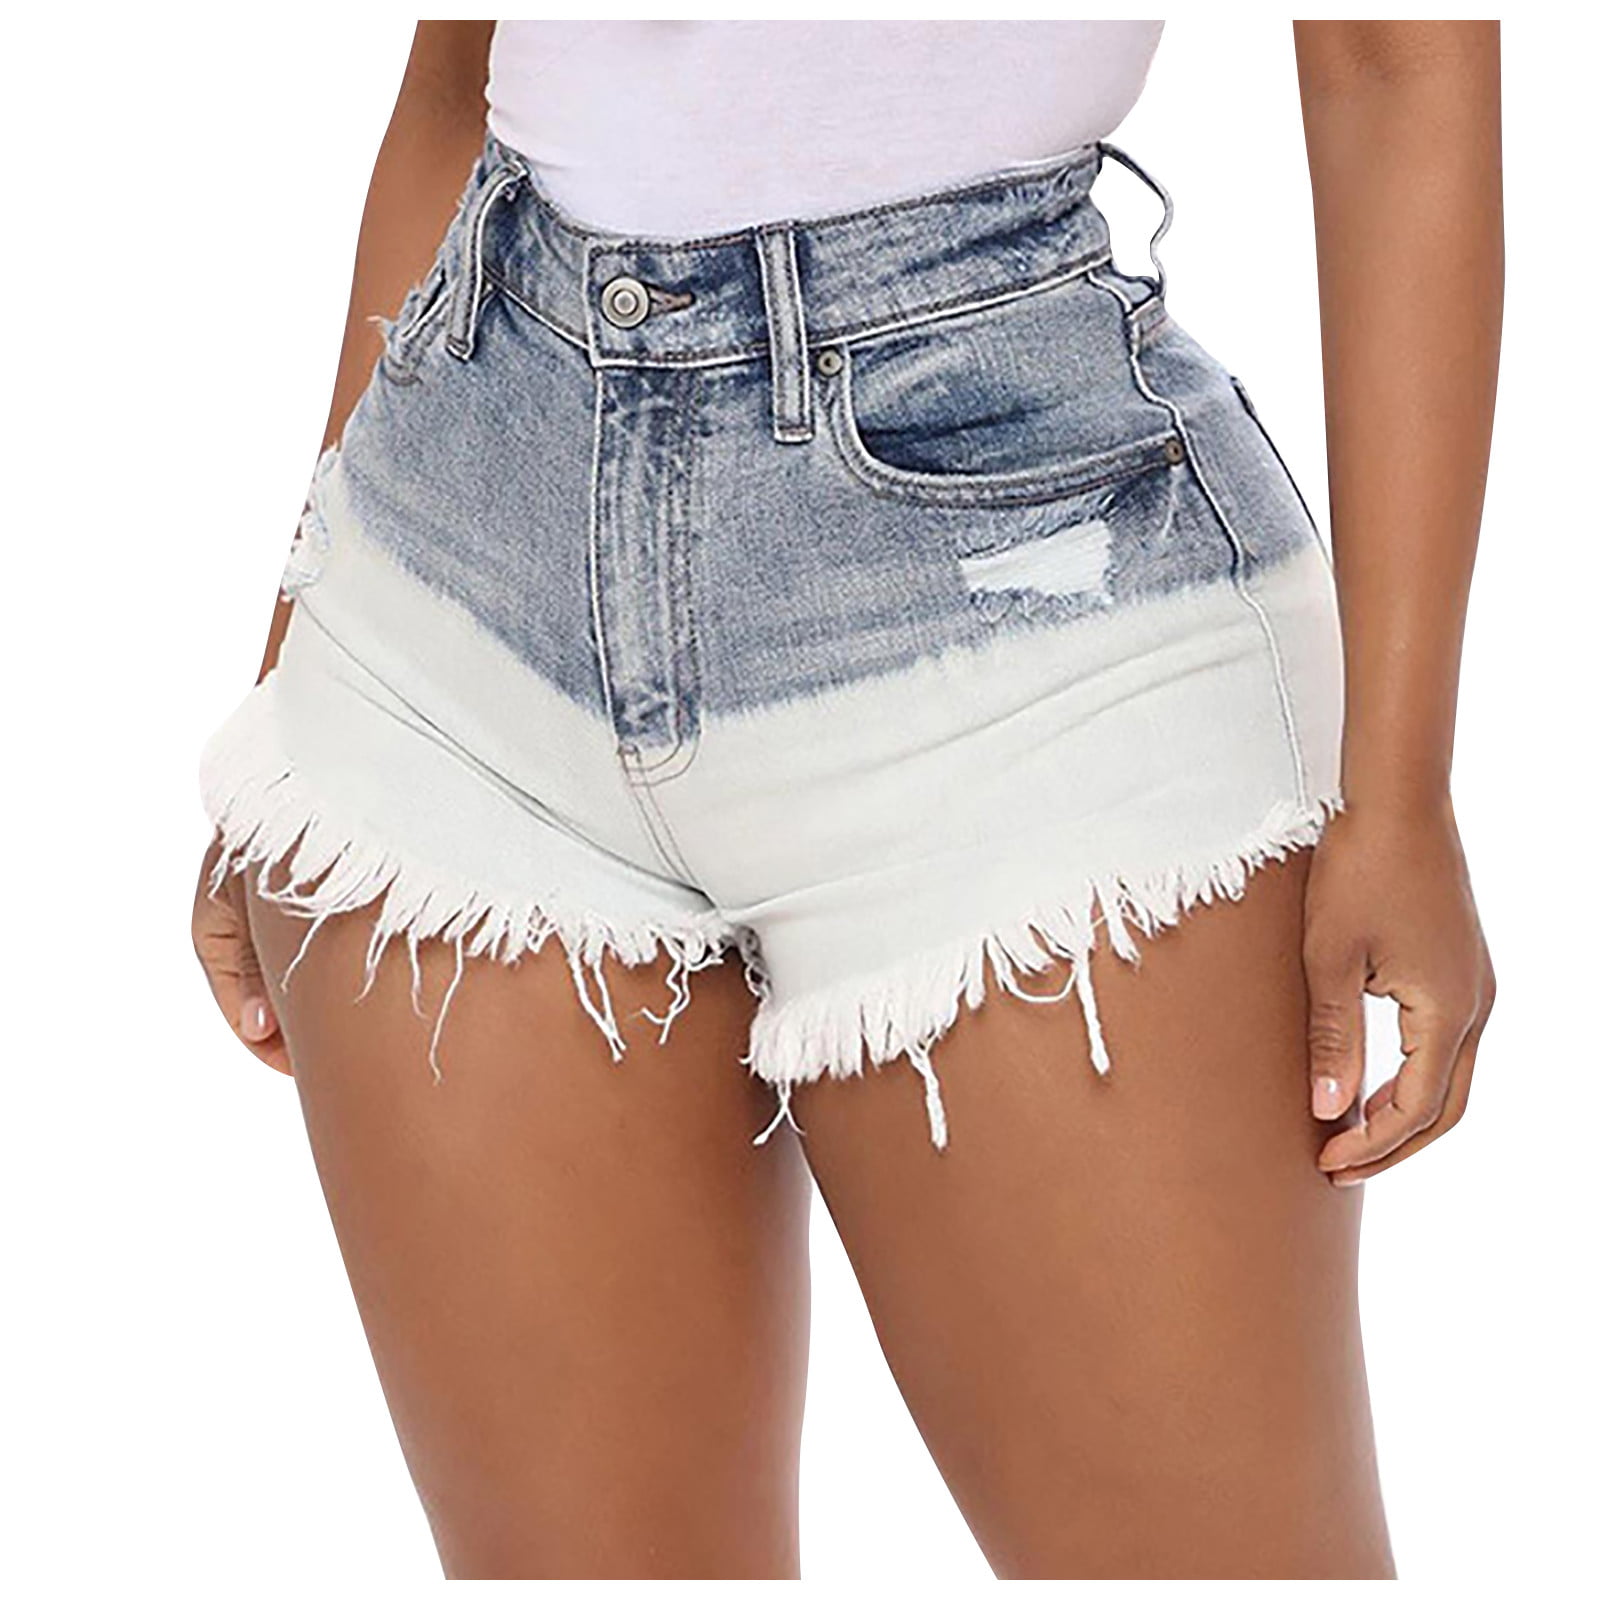 Womens Denim Shorts Summer Classic Ripped Destroyed Distressed Jeans Leggings Comfortable Stretch Skinny Pants bo